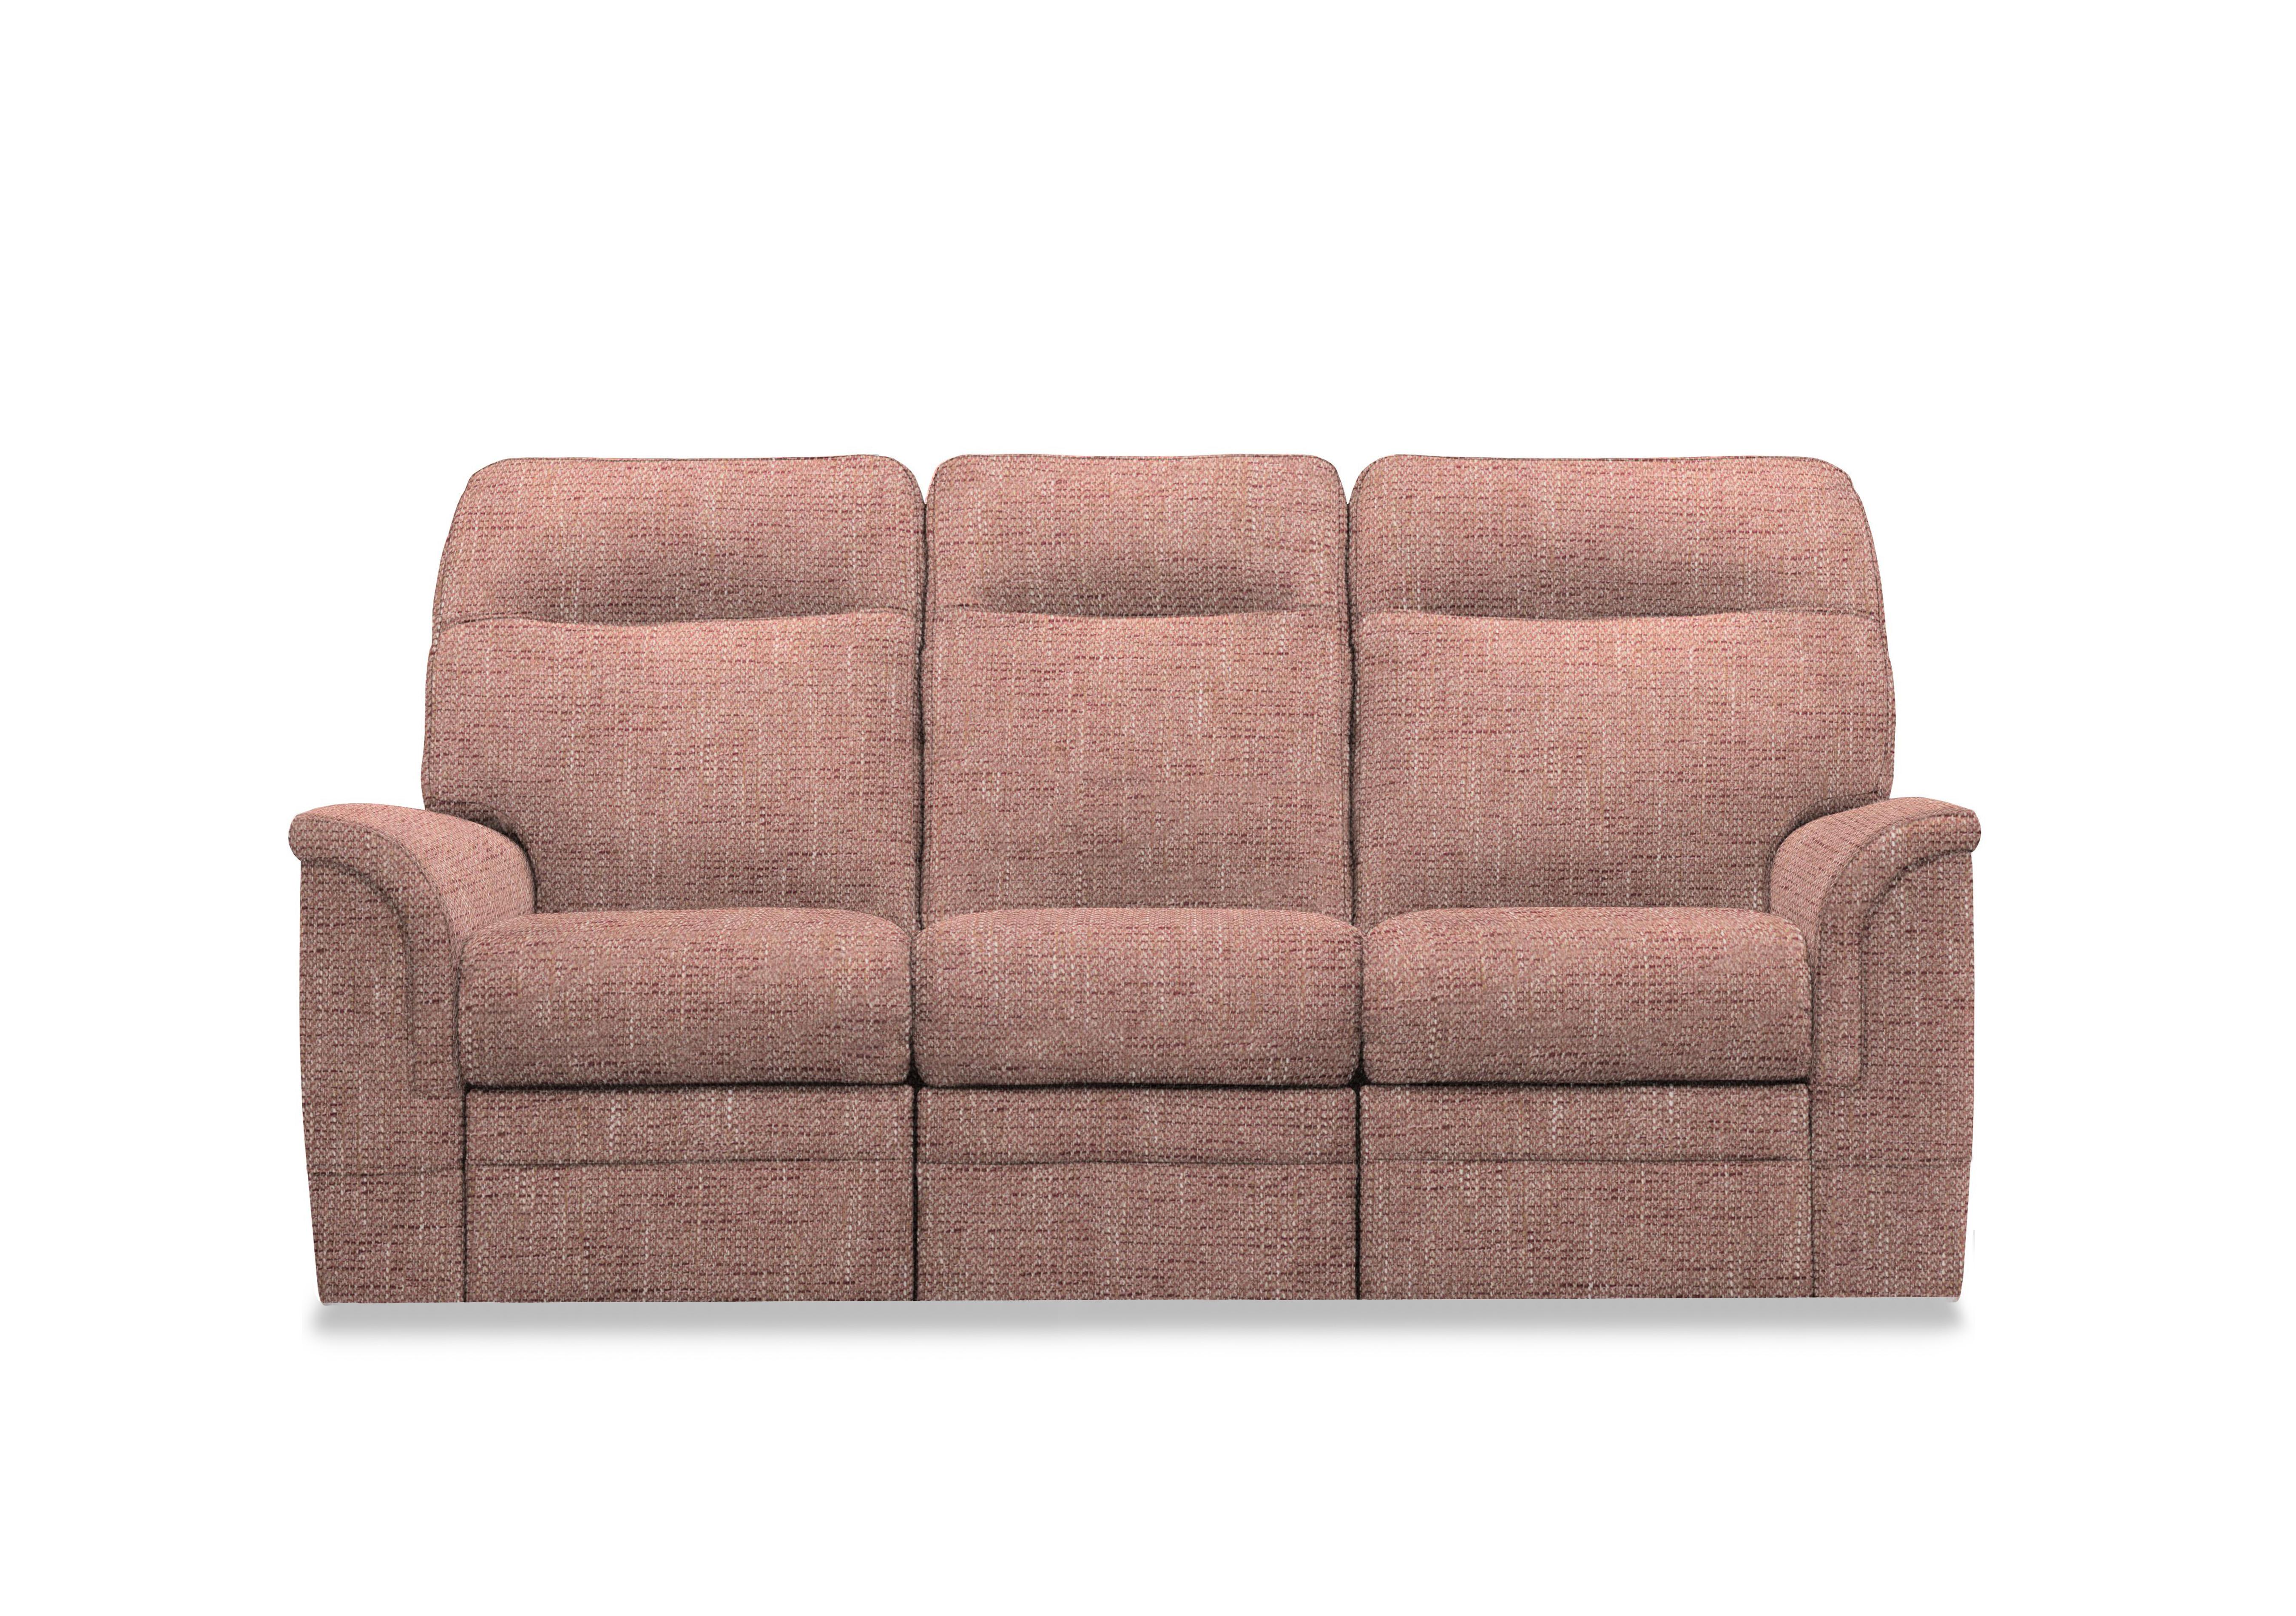 Hudson 23 Fabric 3 Seater Power Recliner Sofa with Power Headrests and Power Lumbar in Country Rose 001409-0003 on Furniture Village